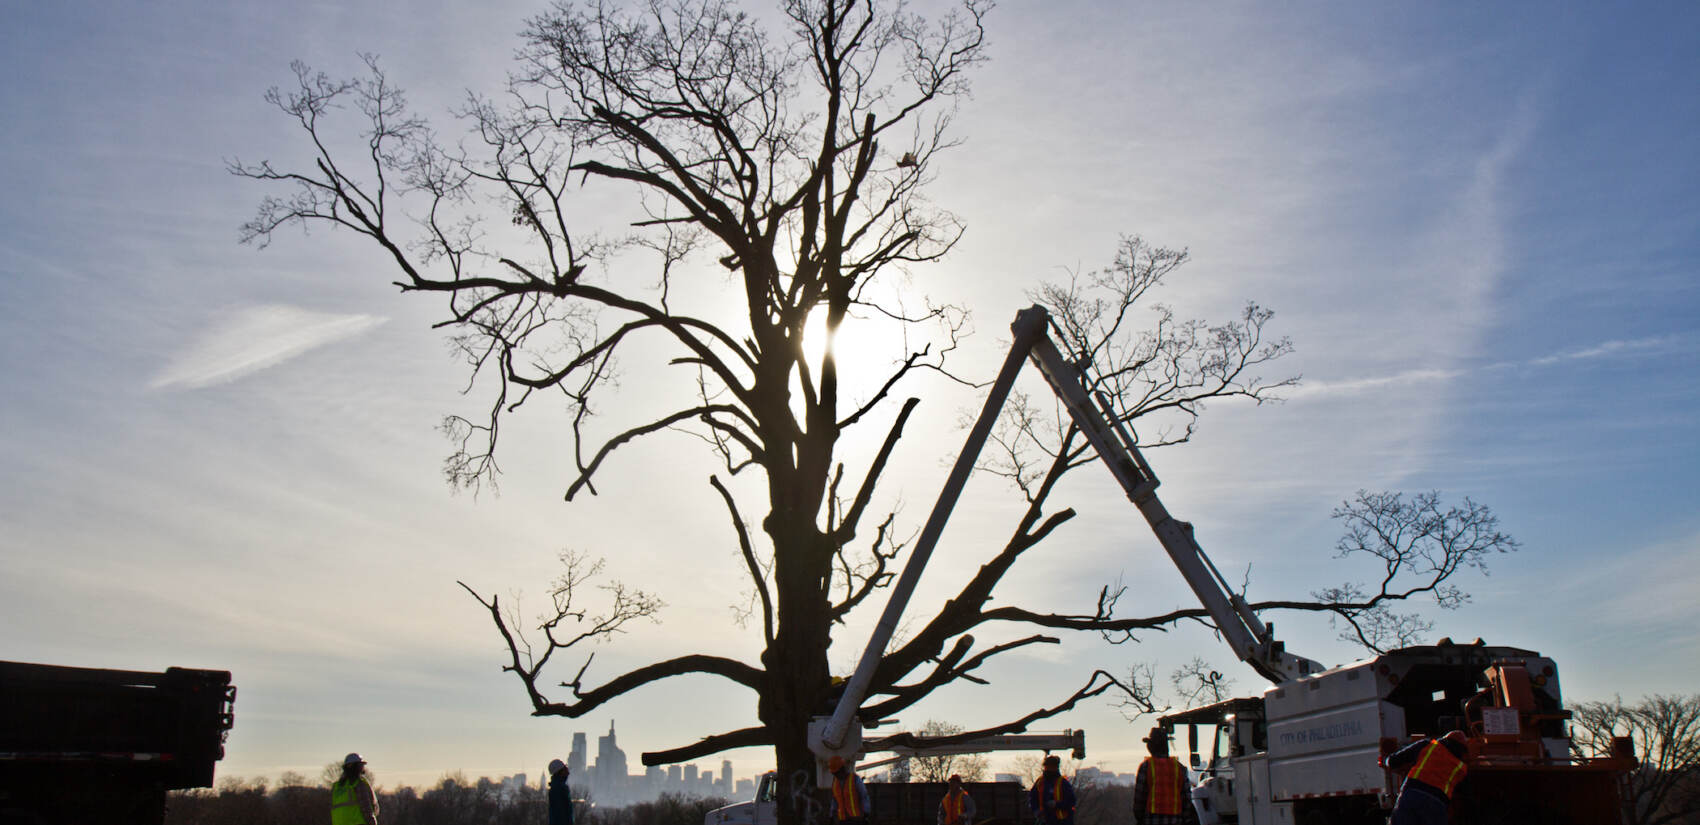 Philadelphia Parks and Rec work to remove the Belmont Plateau’s iconic sugar maple tree on the morning of Dec. 15, 2021